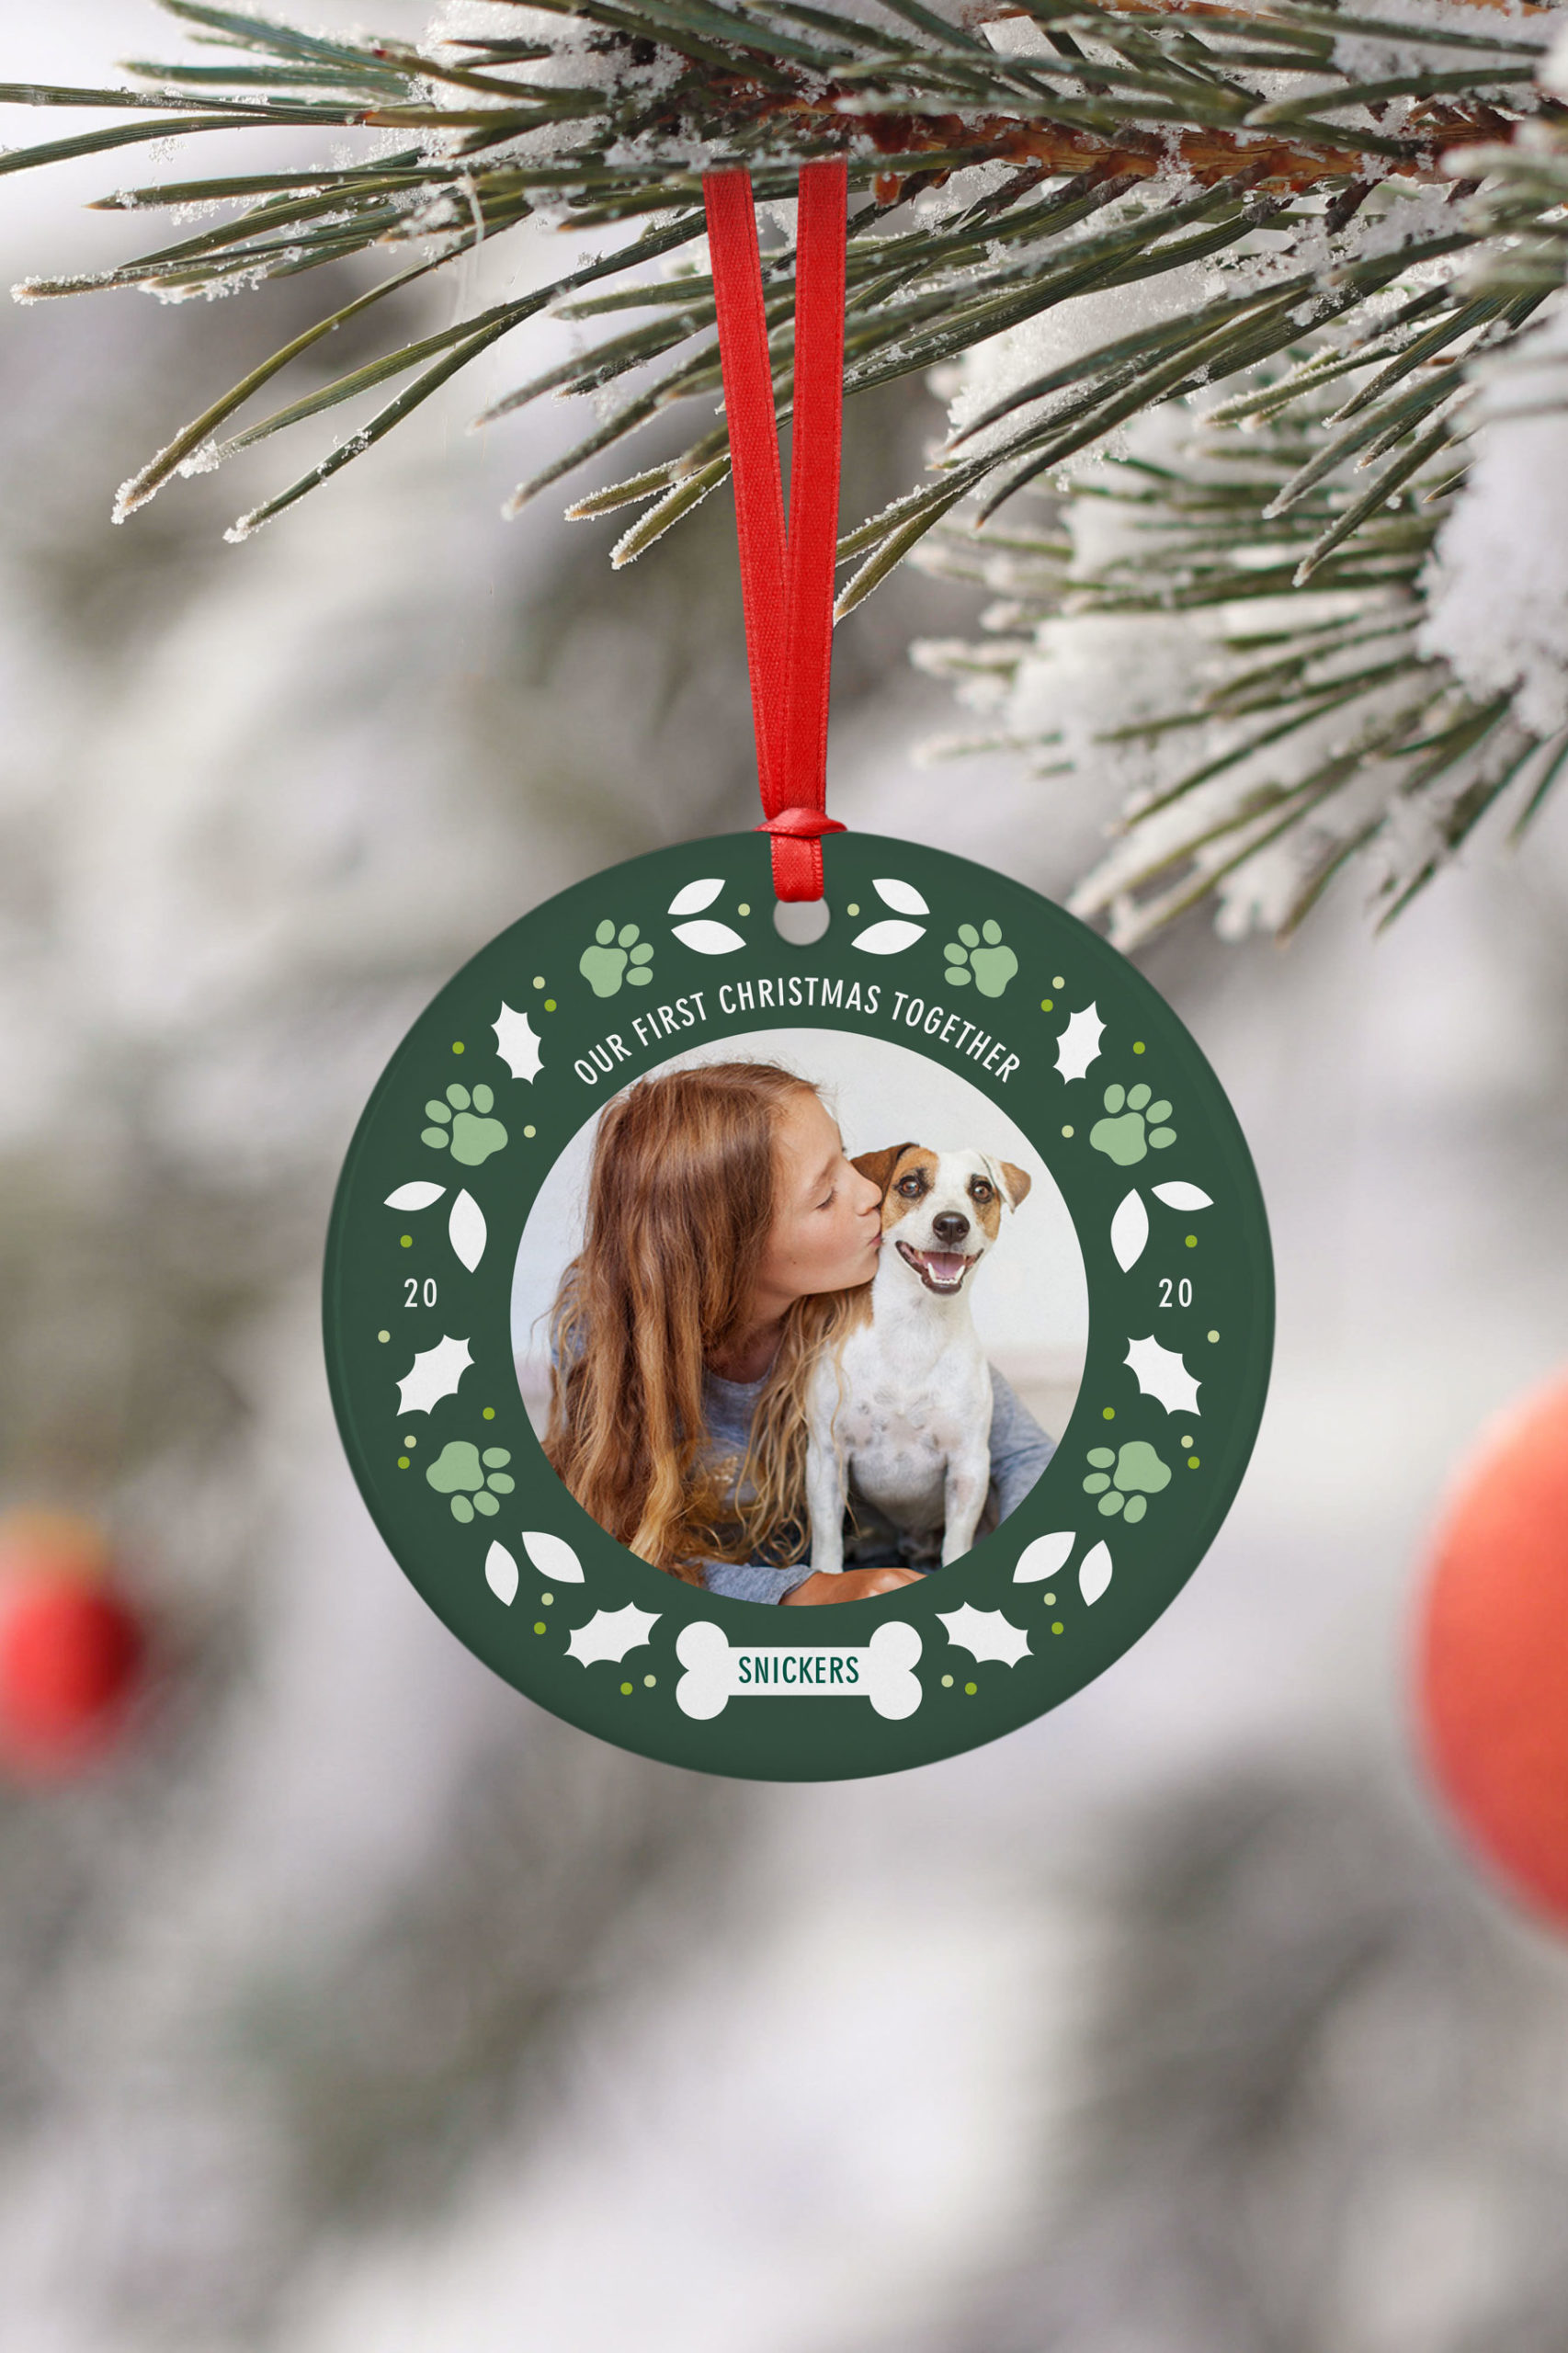 First year with new pet Christmas ornament